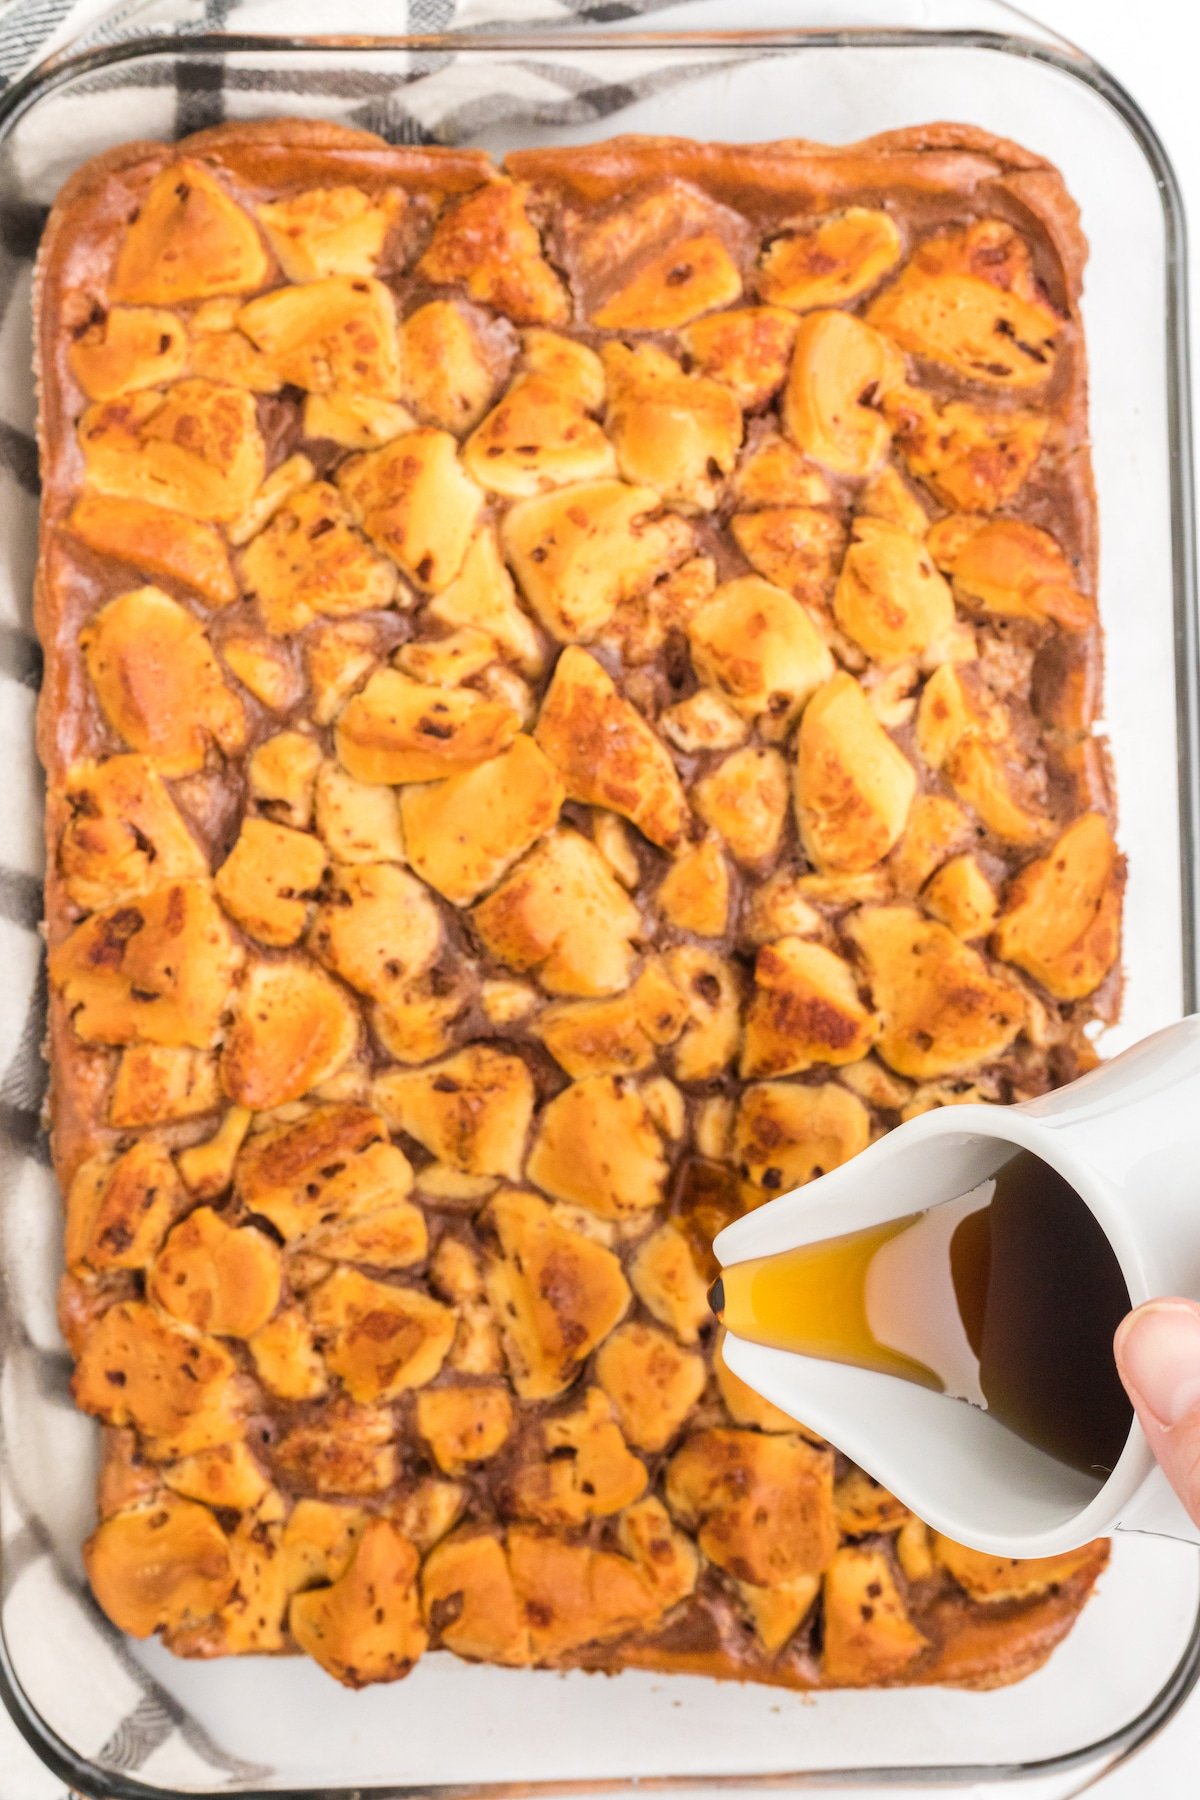 Maple syrup being poured over cinnamon roll casserole